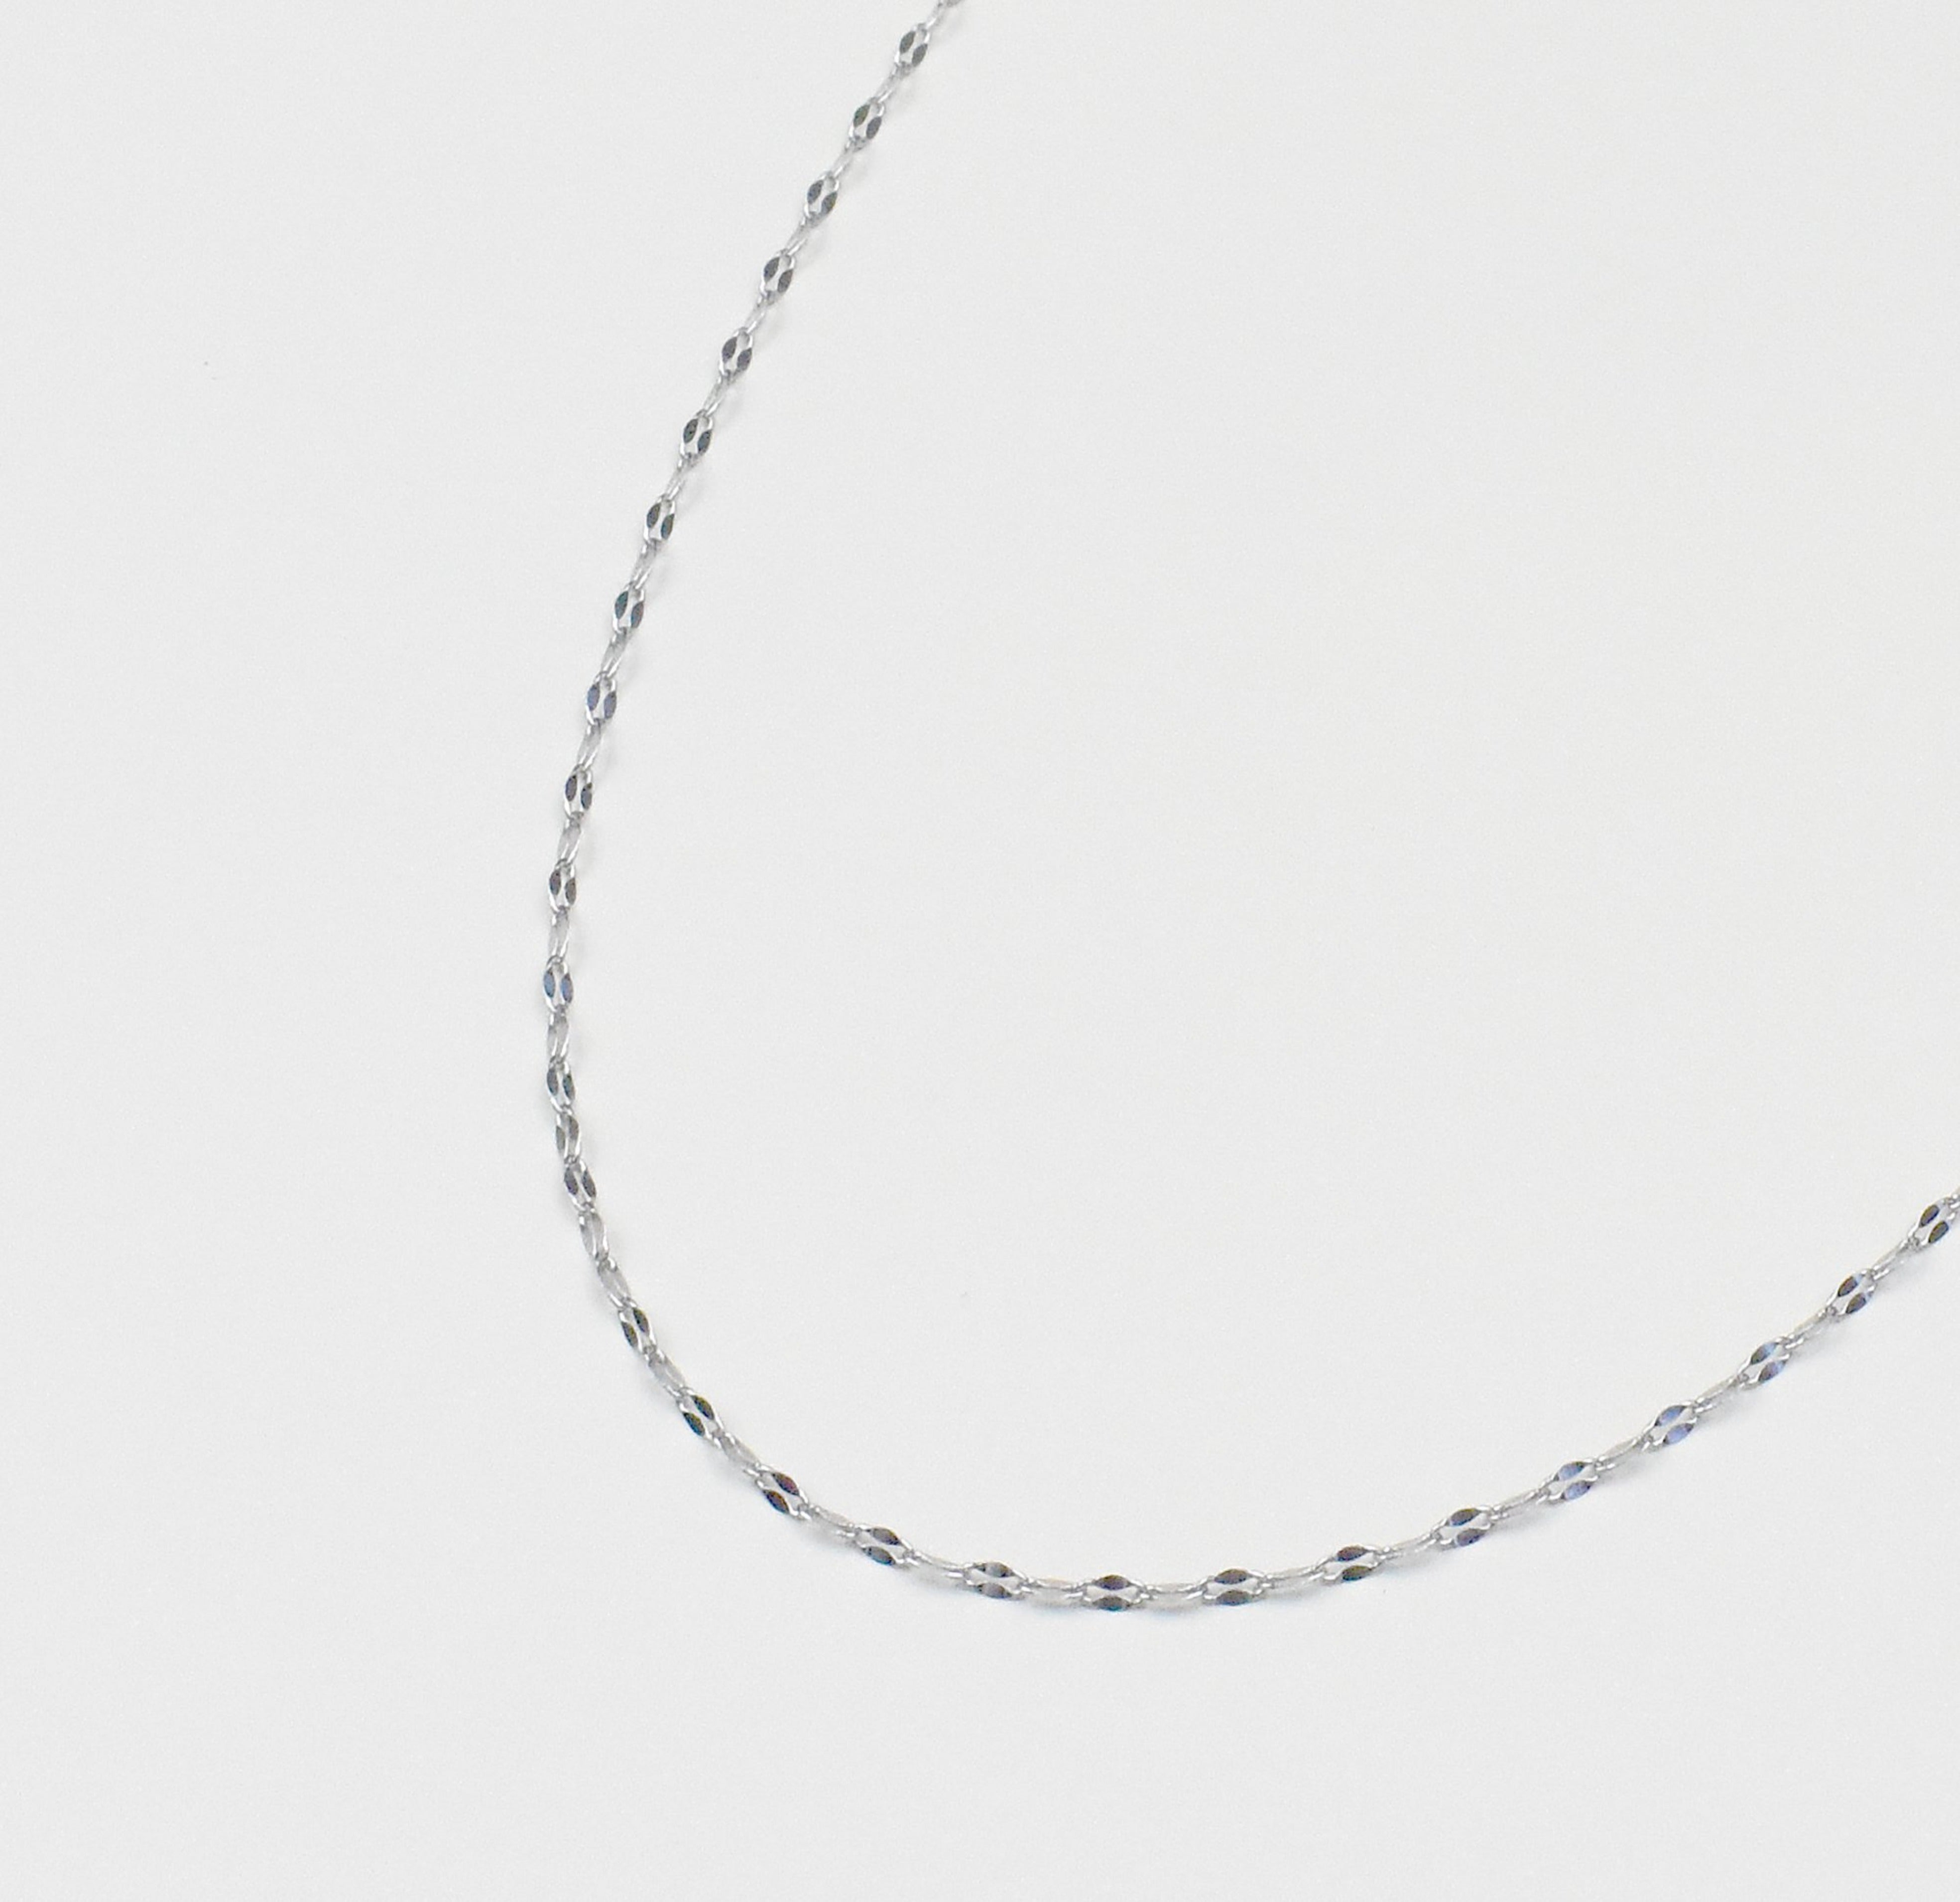 ELSIE SILVER DAINTY LACE CHAIN NECKLACE